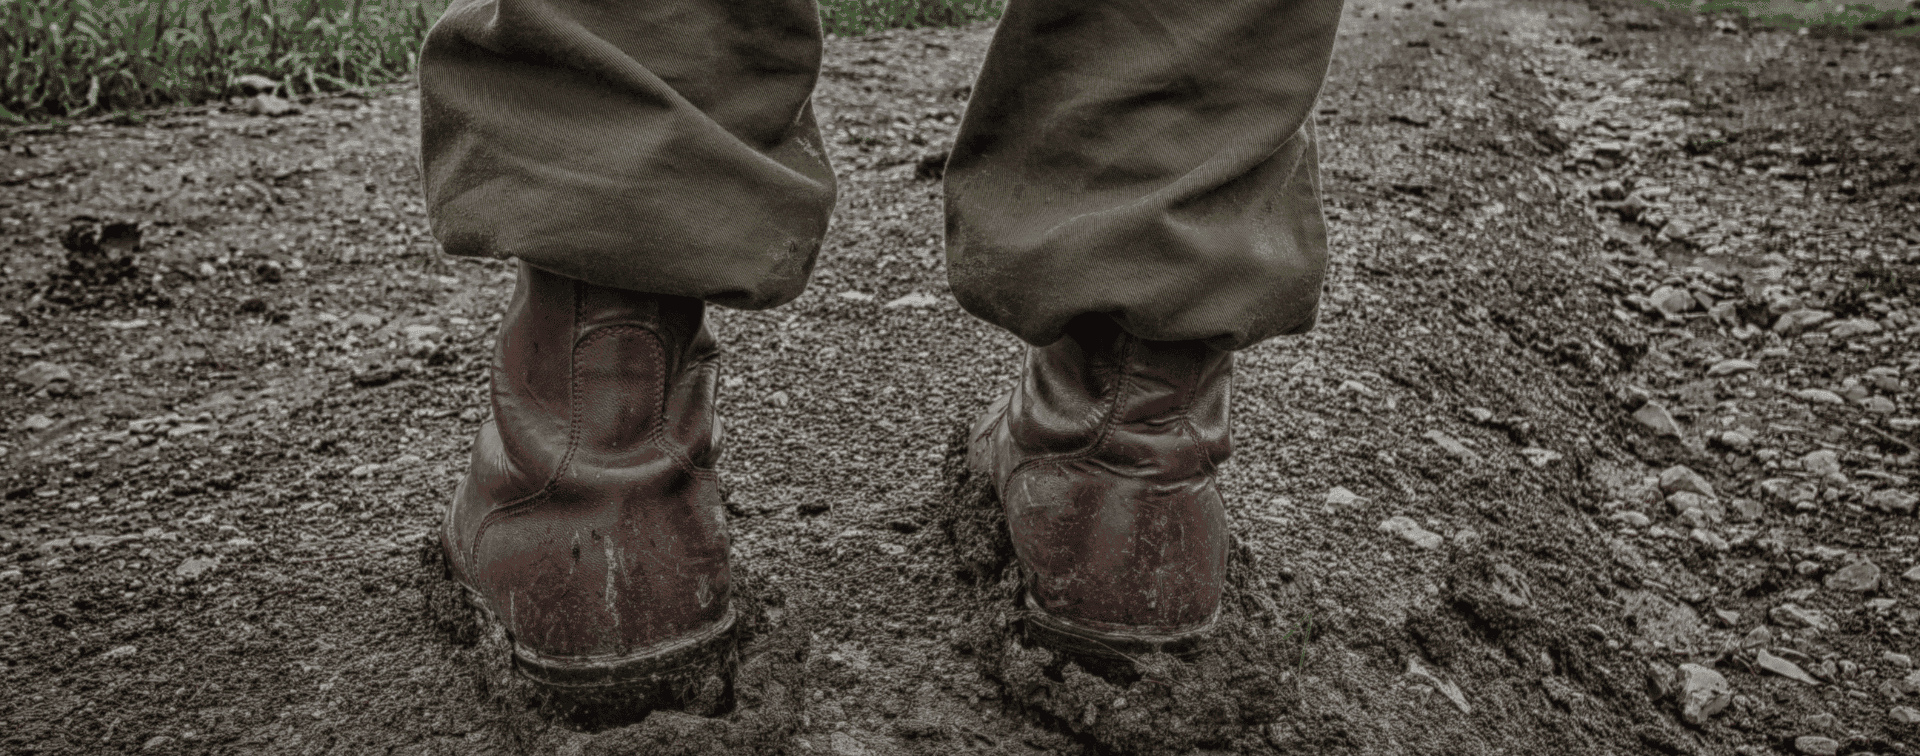 Military Rangers shoes in the mud